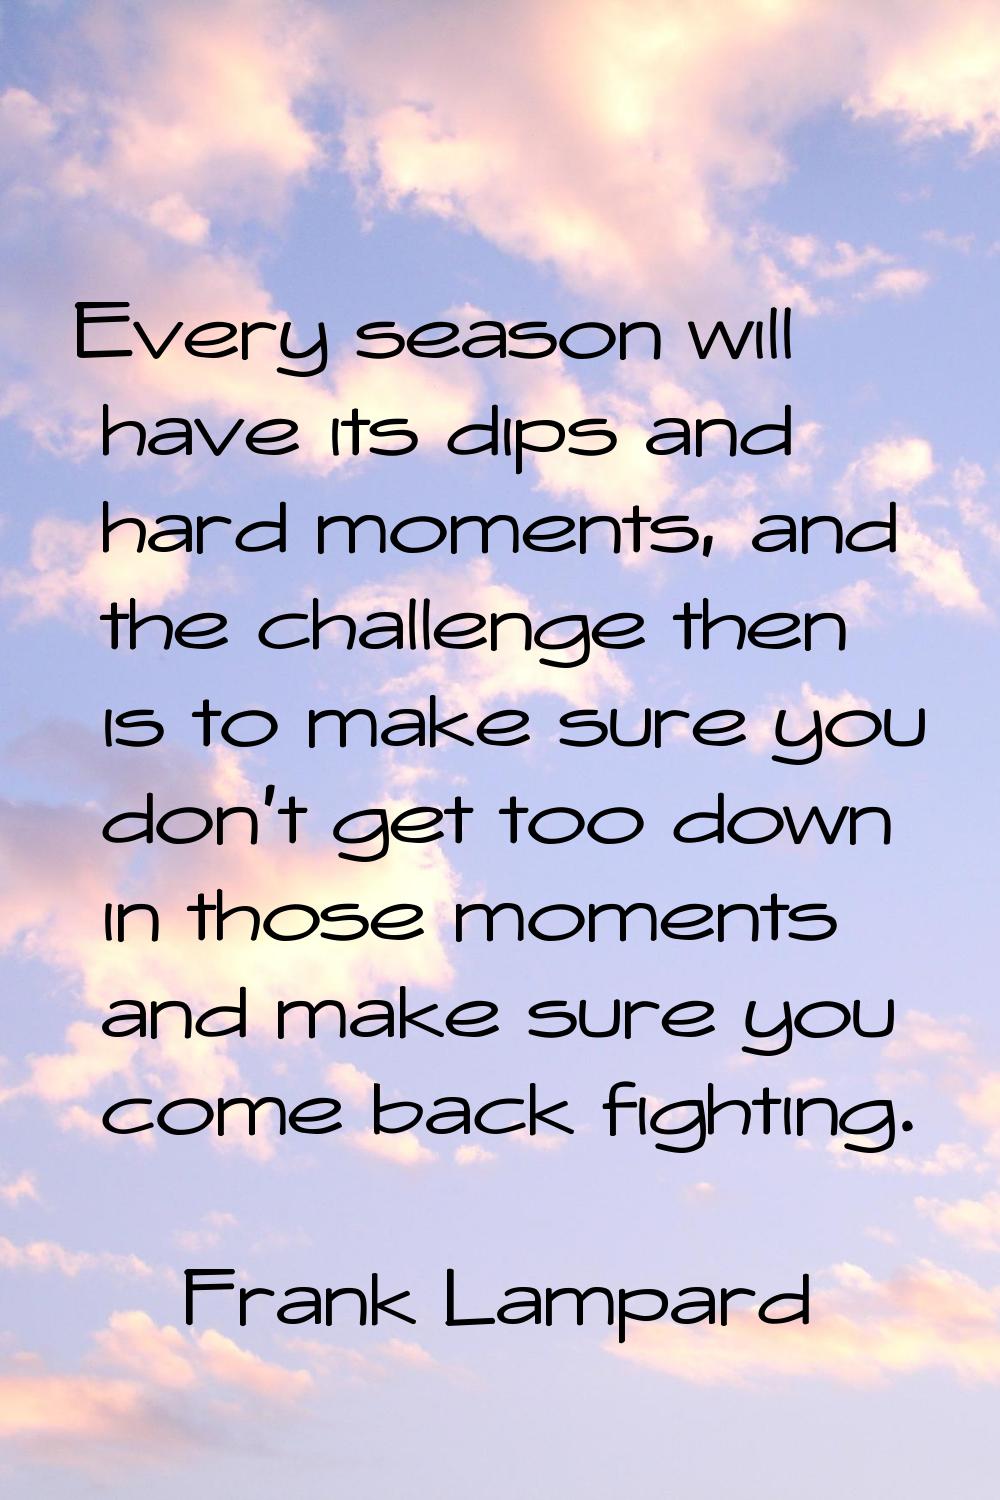 Every season will have its dips and hard moments, and the challenge then is to make sure you don't 